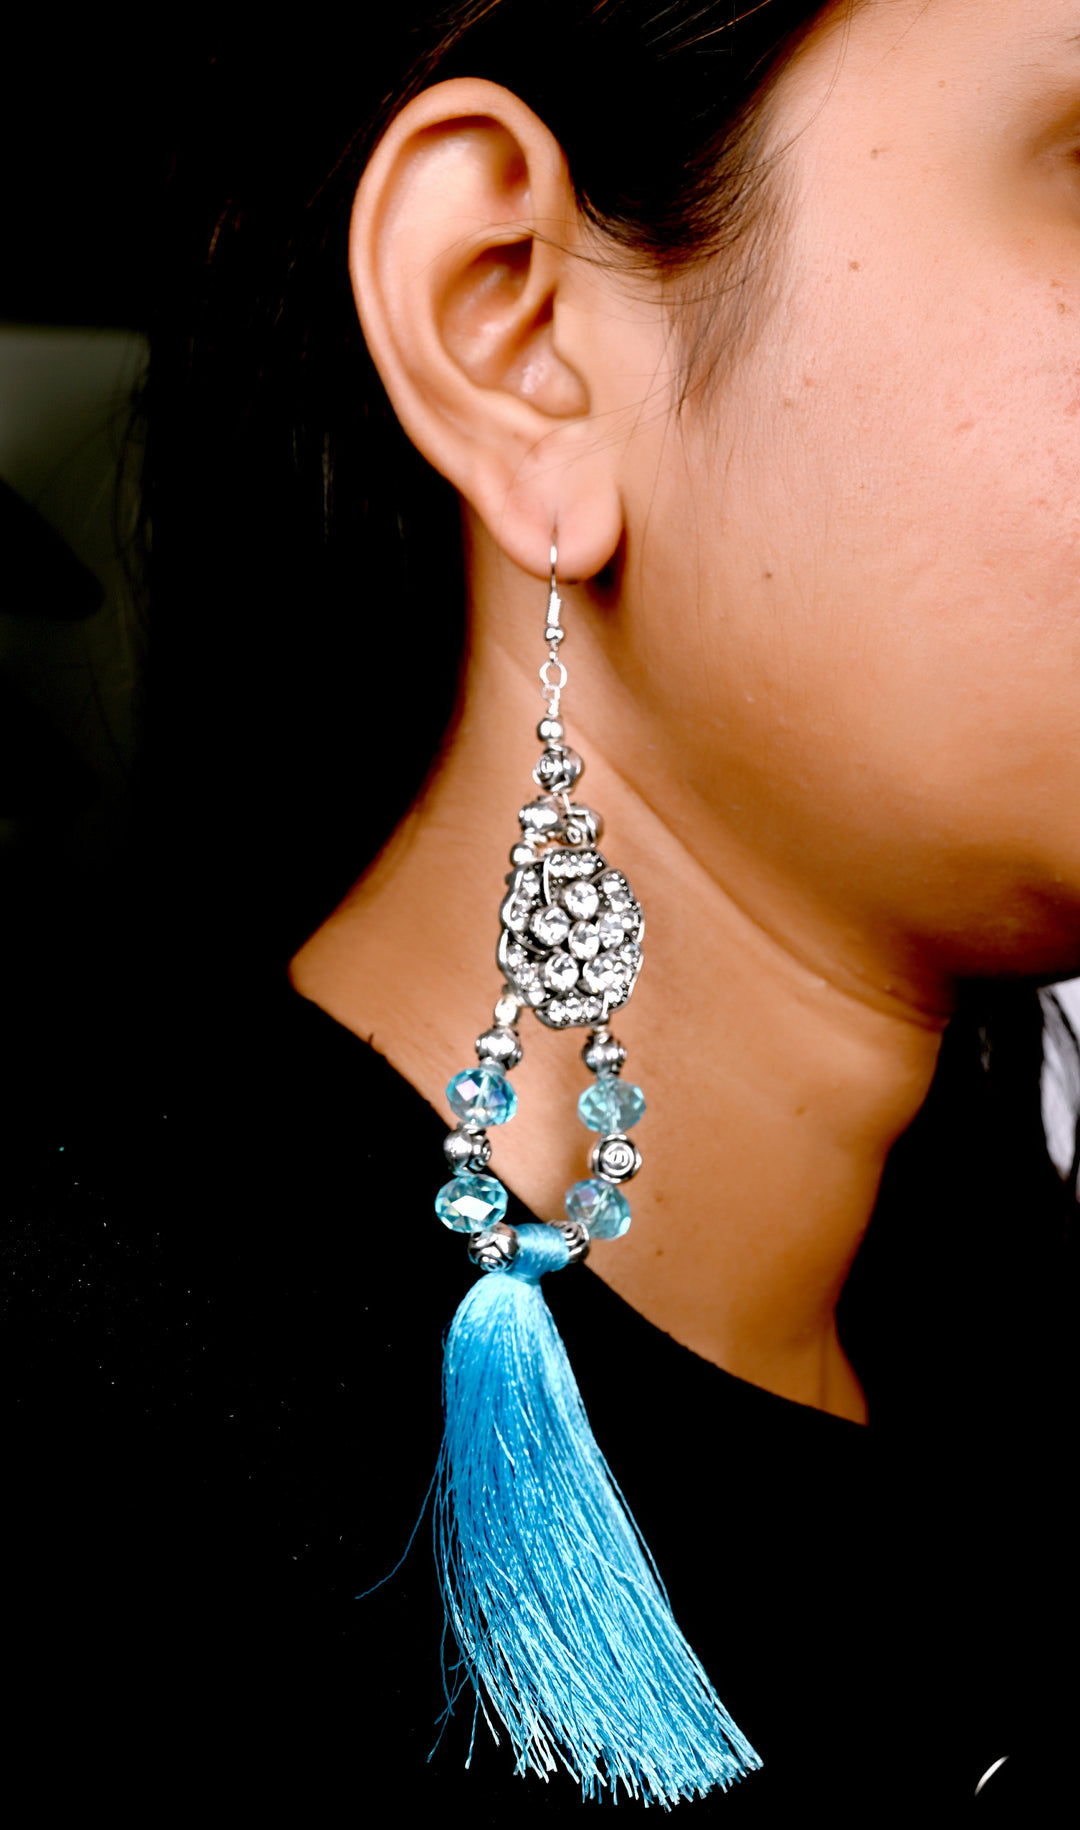 Long Earring Made Of Flower Shaped Metal Beads Having Beads On It, Multi Faceted Glass Beads Strung In Hoop And Styled With Turquoise Colored Tassel